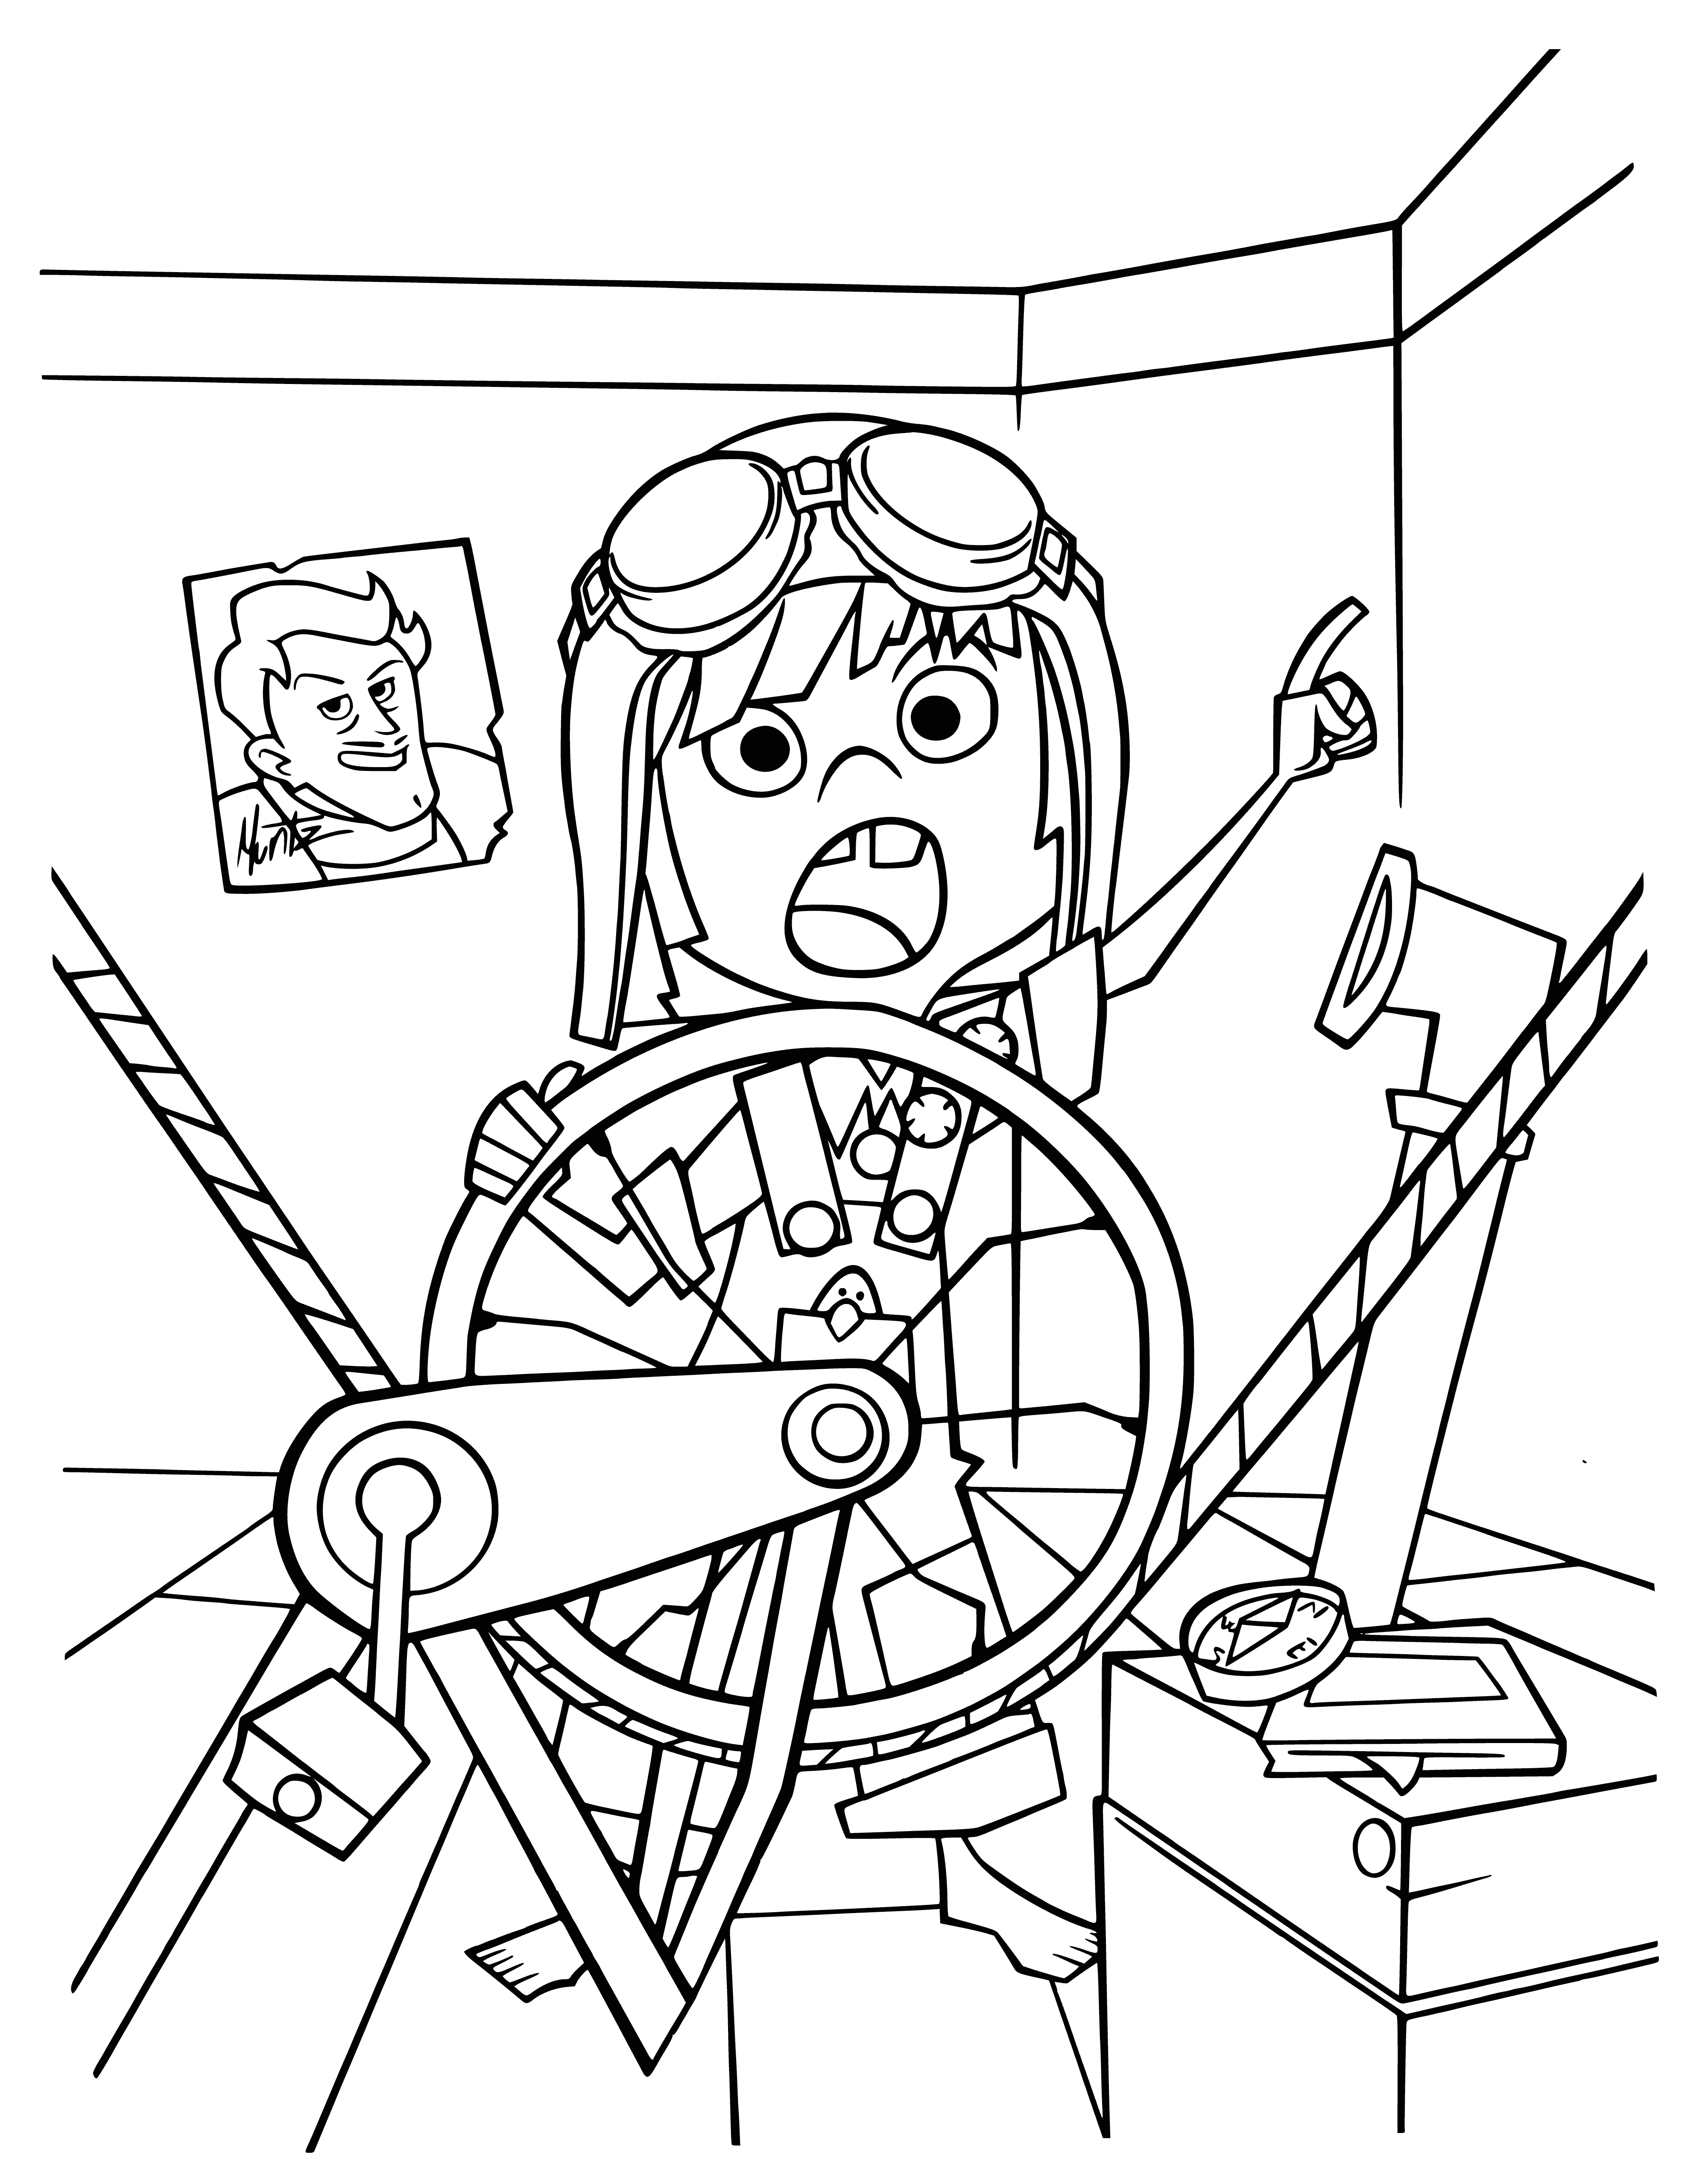 coloring page: Girl plays with ball, throwing and catching it. Wearing dress, bow in her hair, she looks happy.